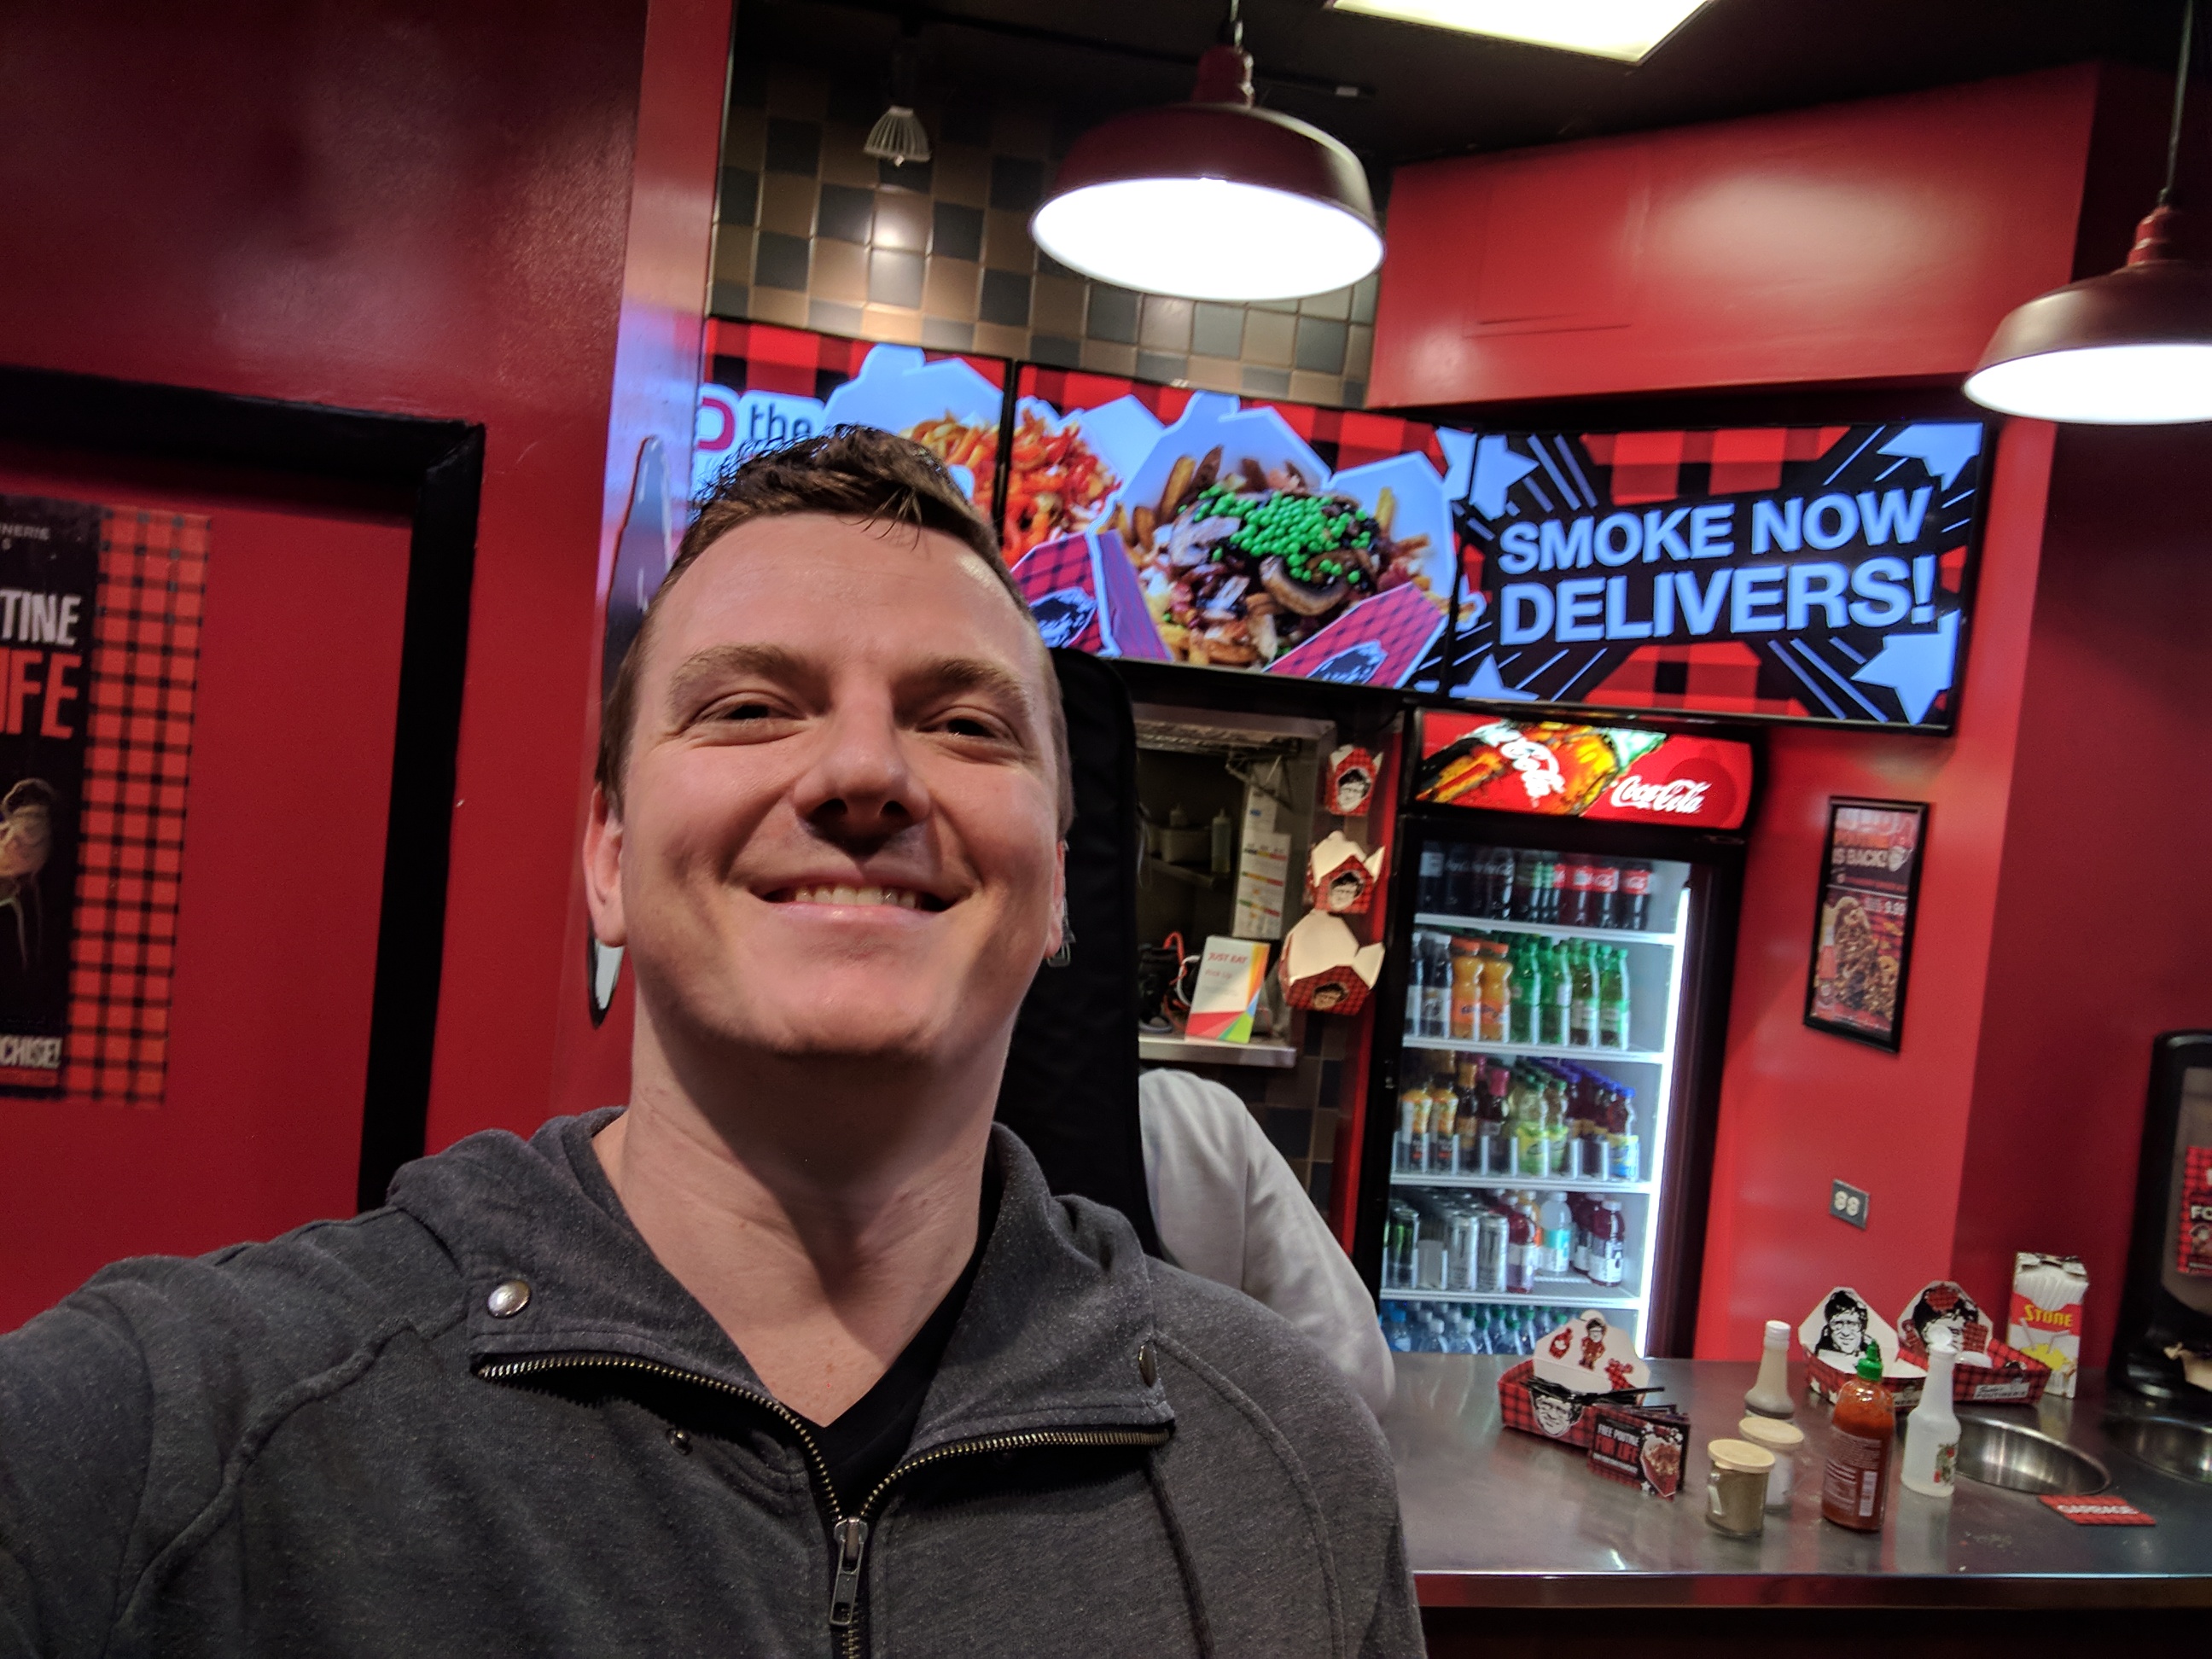 Me looking super happy at the poutine place. The display reads "Smoke now delivers!"